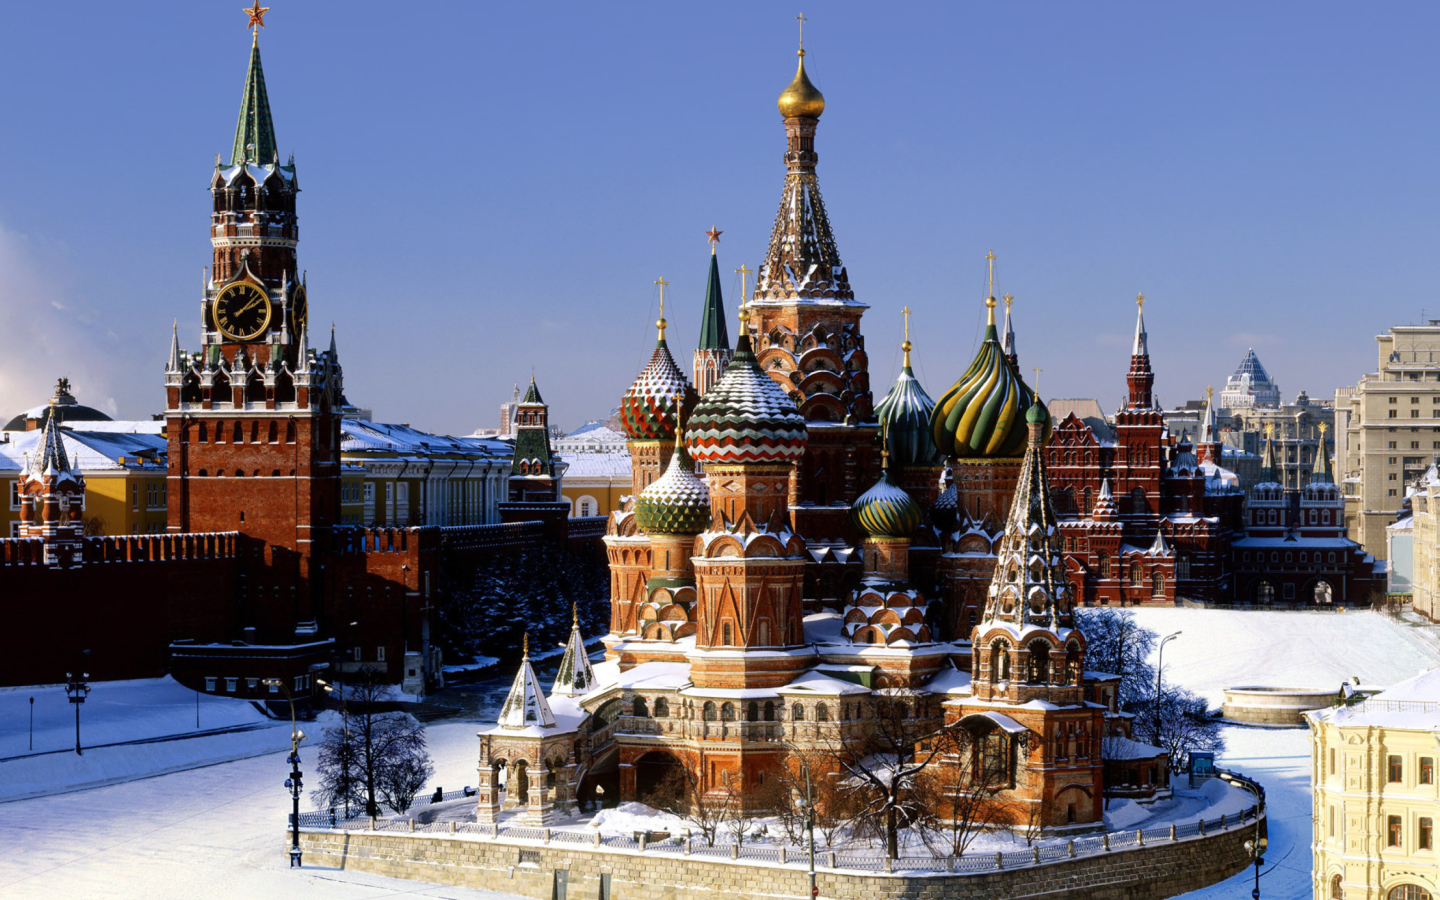 Das Moscow - Red Square Wallpaper 1440x900